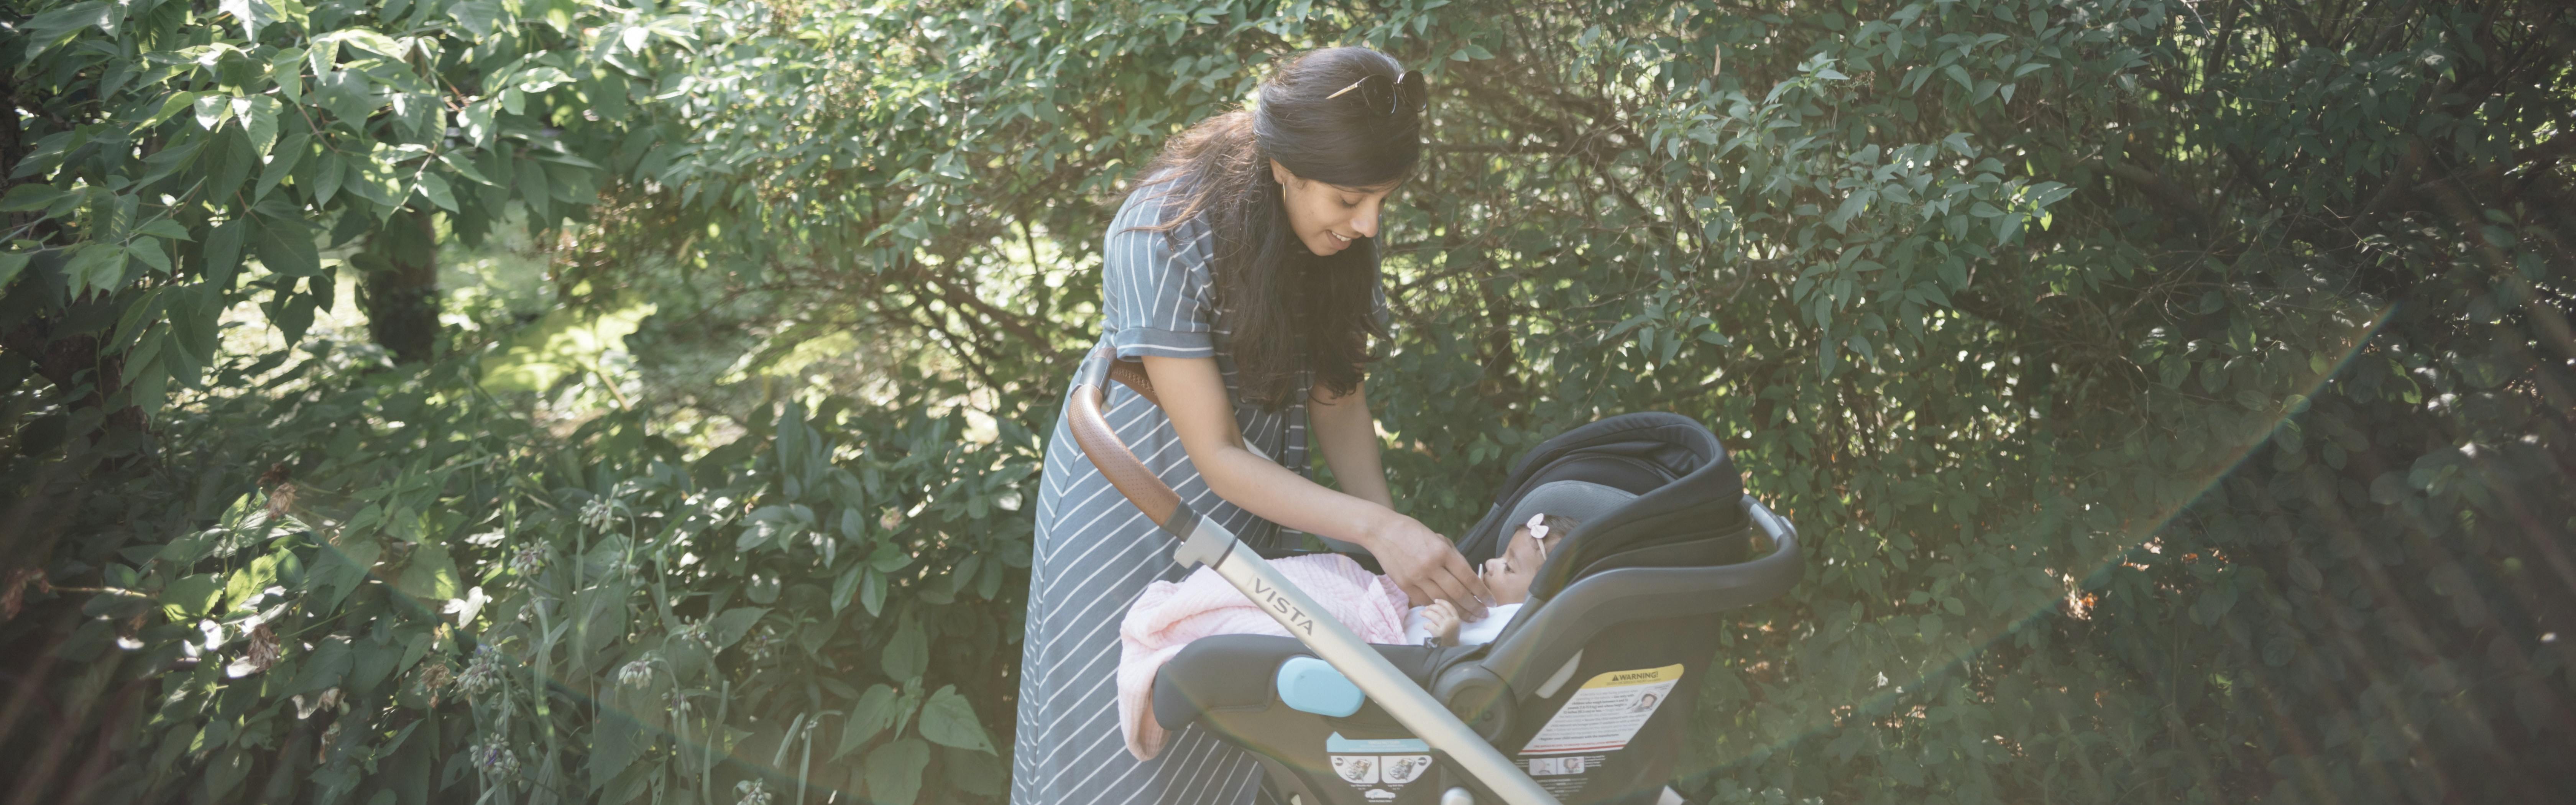 A woman smiles at a baby in a car seat. The car seat is in a stroller and the woman is standing near some foliage. 